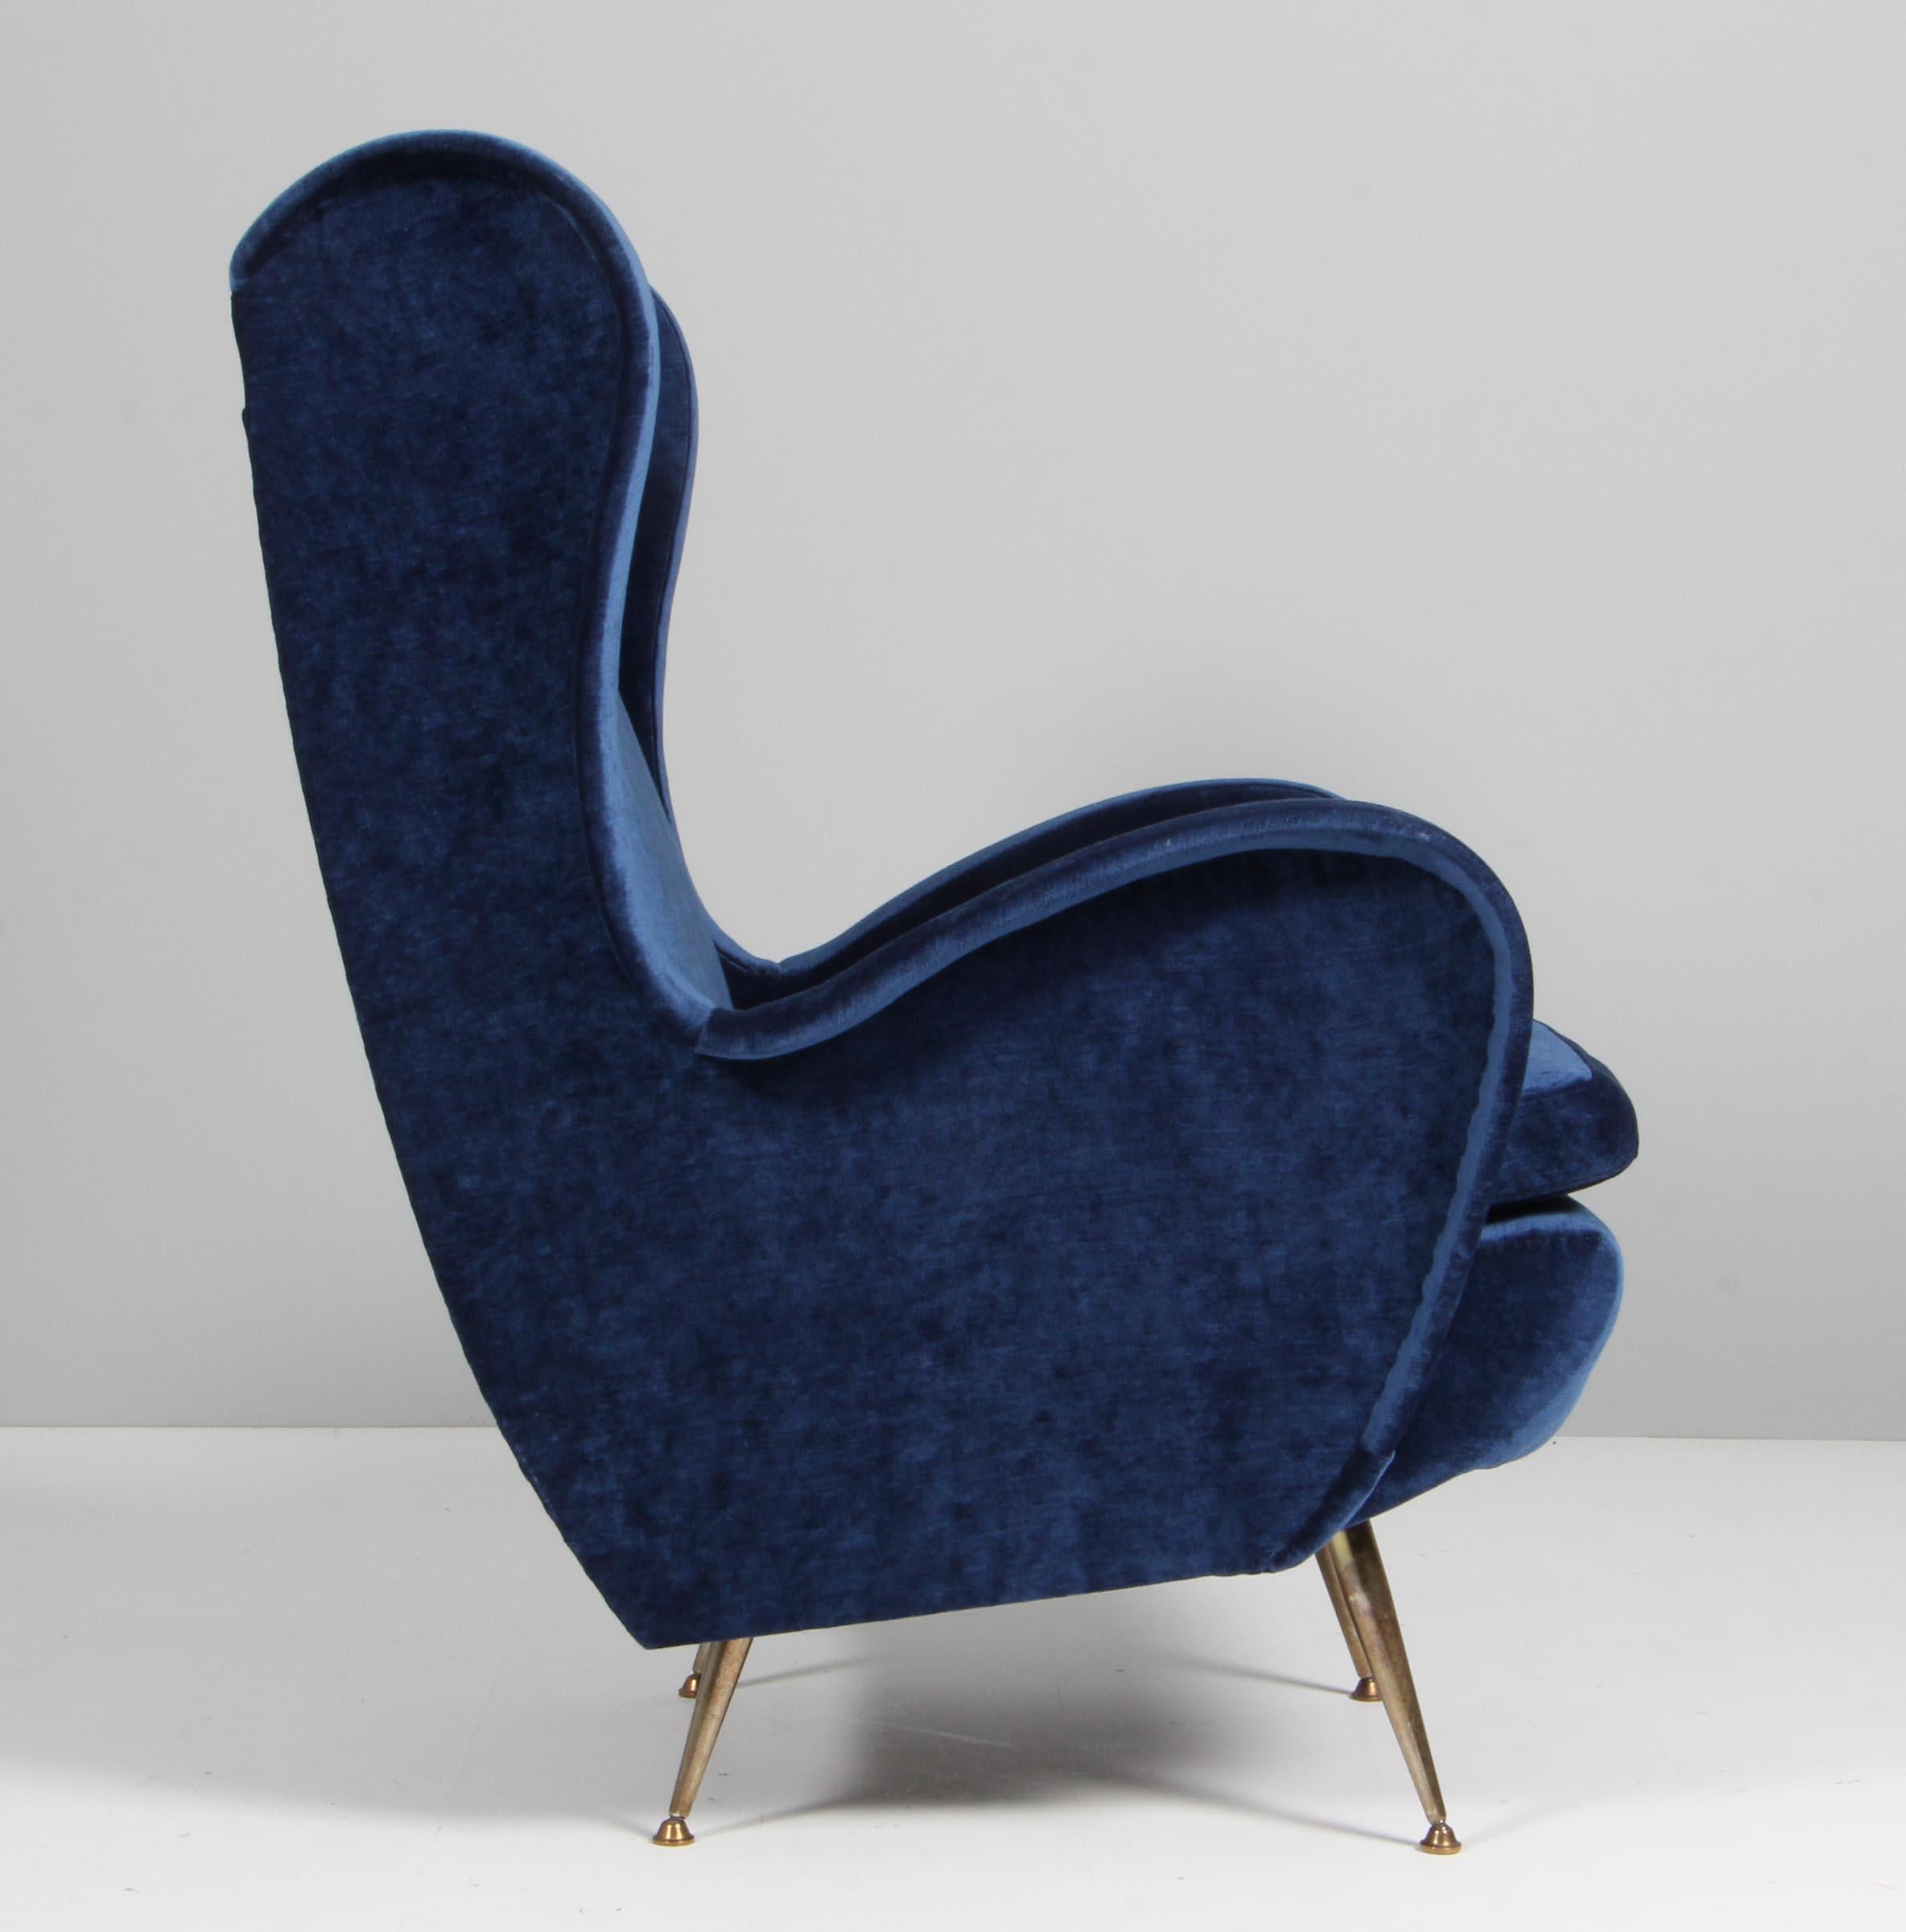 Armchair designed by Gigi Radice for Minotti. Made with solid wood structure and blue velvet covering and polished brass legs. Original upholstery.